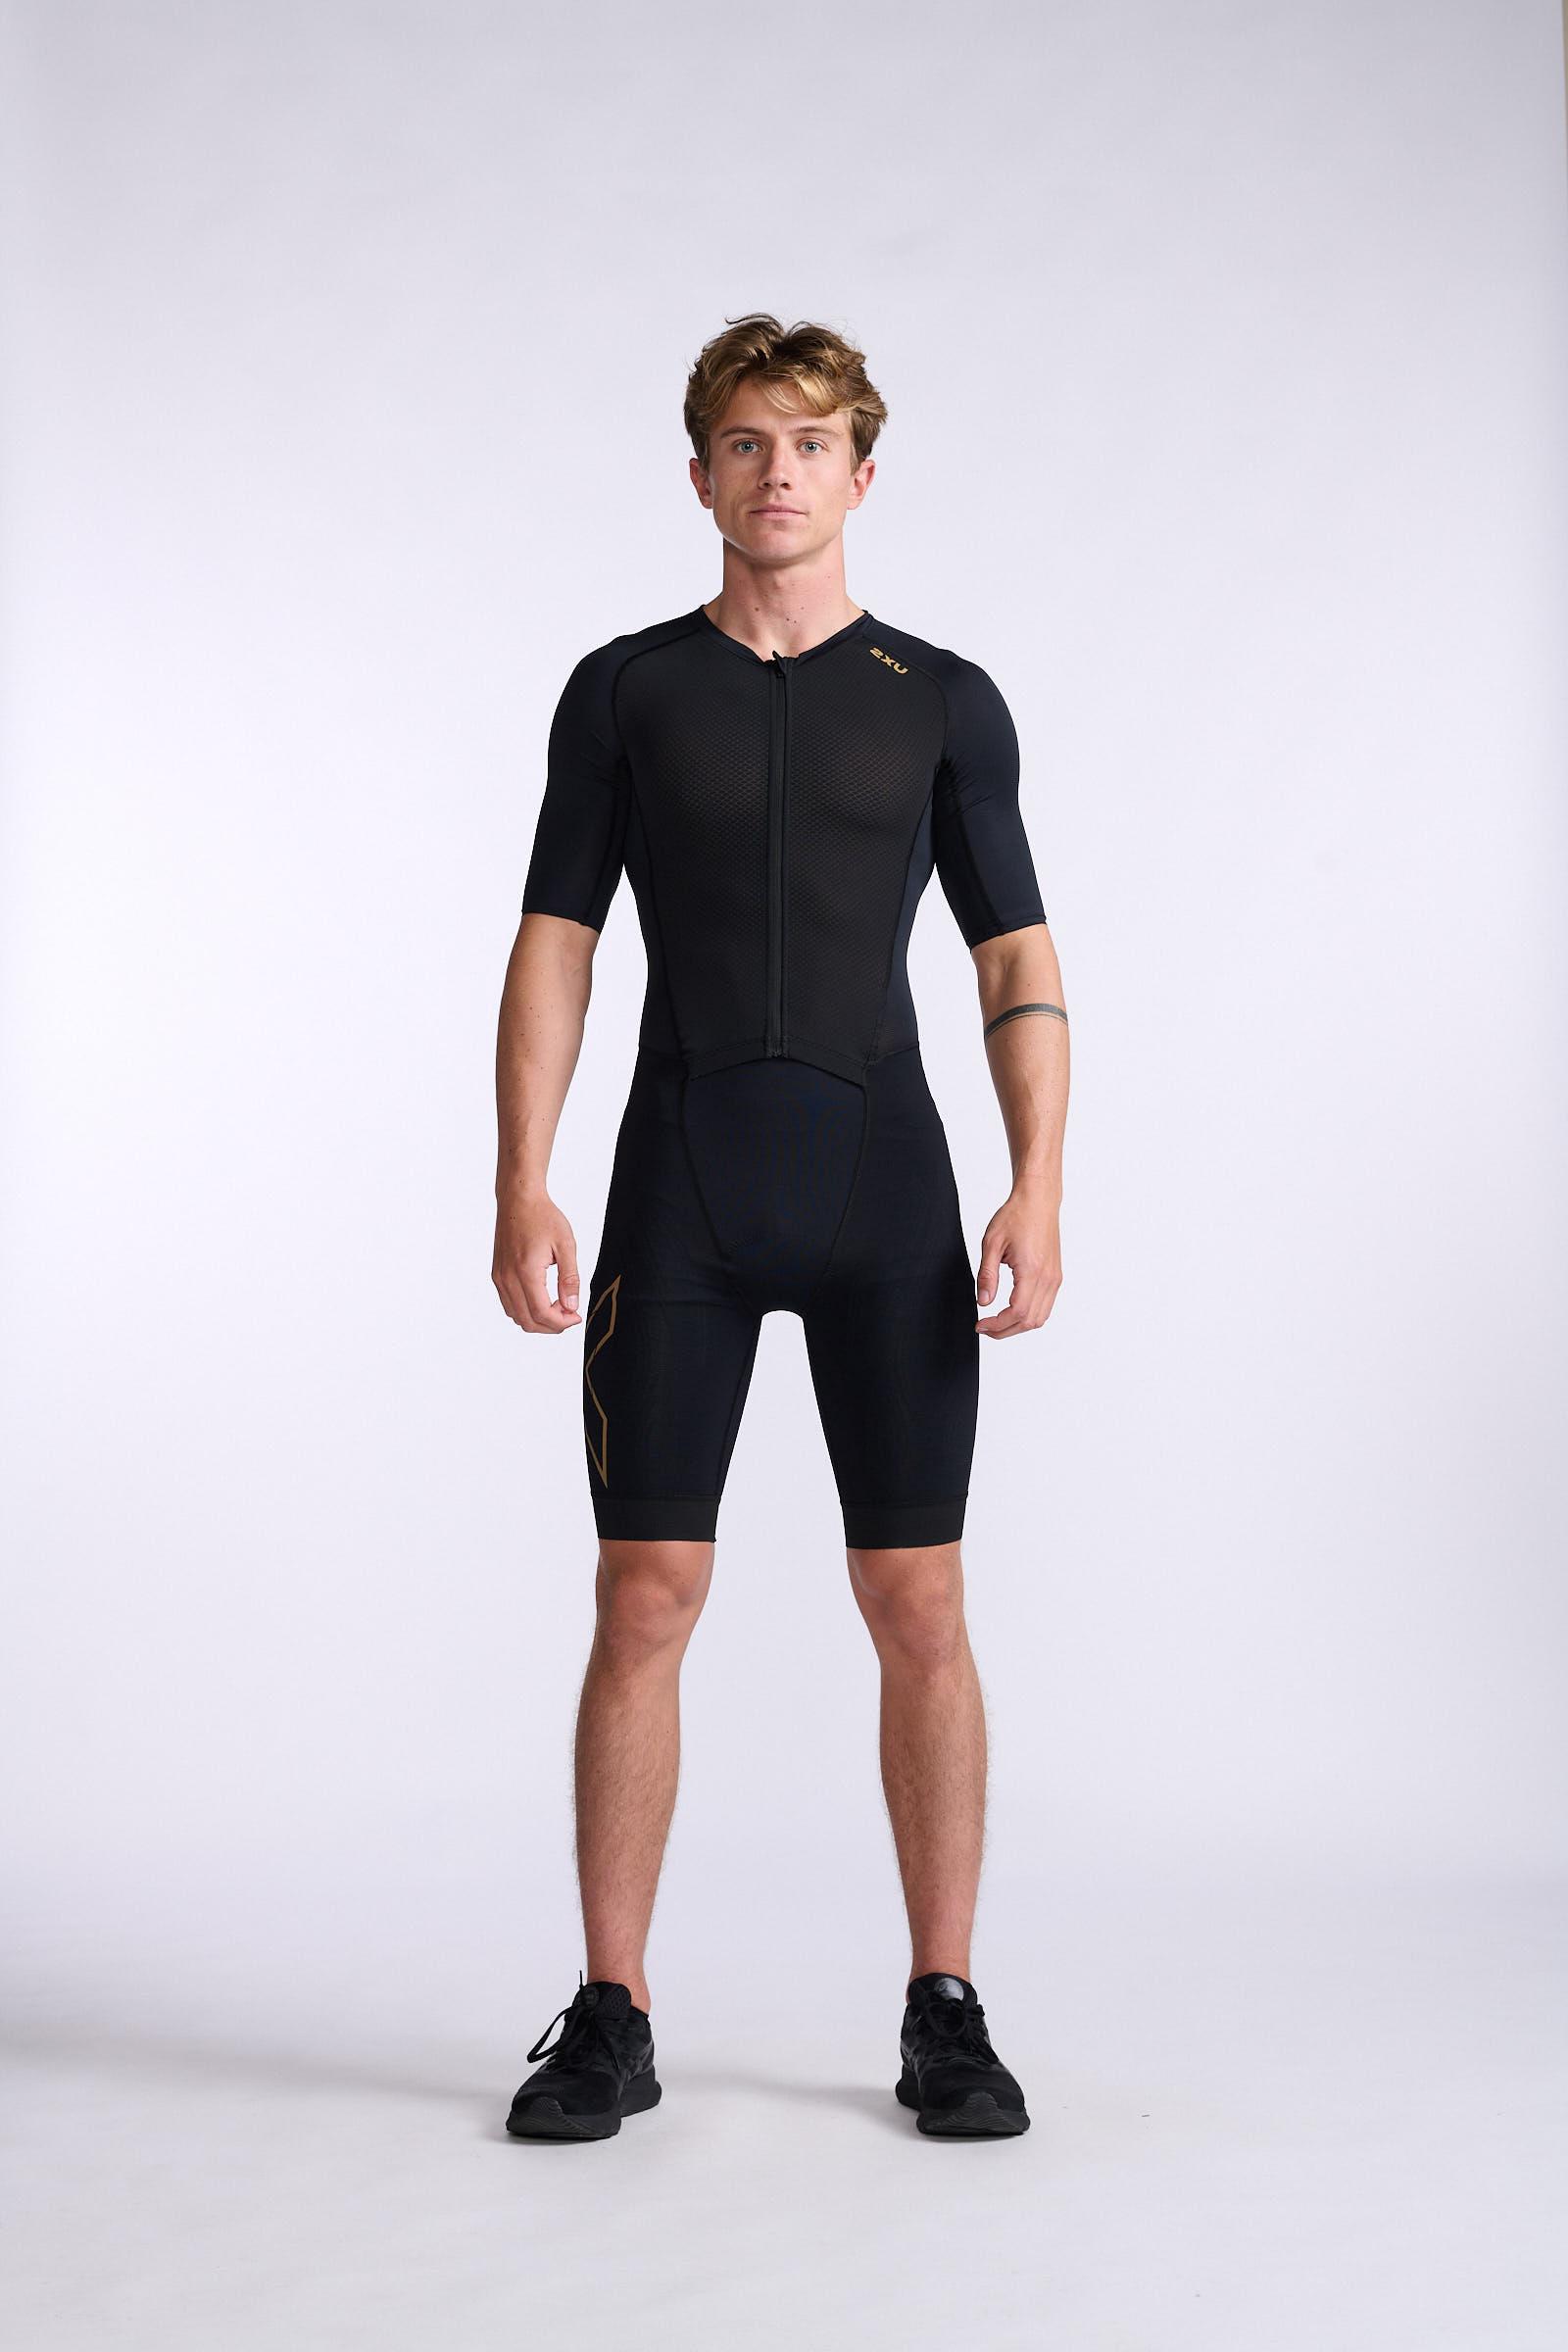 2xu Compression Light Speed Front Zip Sleeved Trisuit - Black/gold